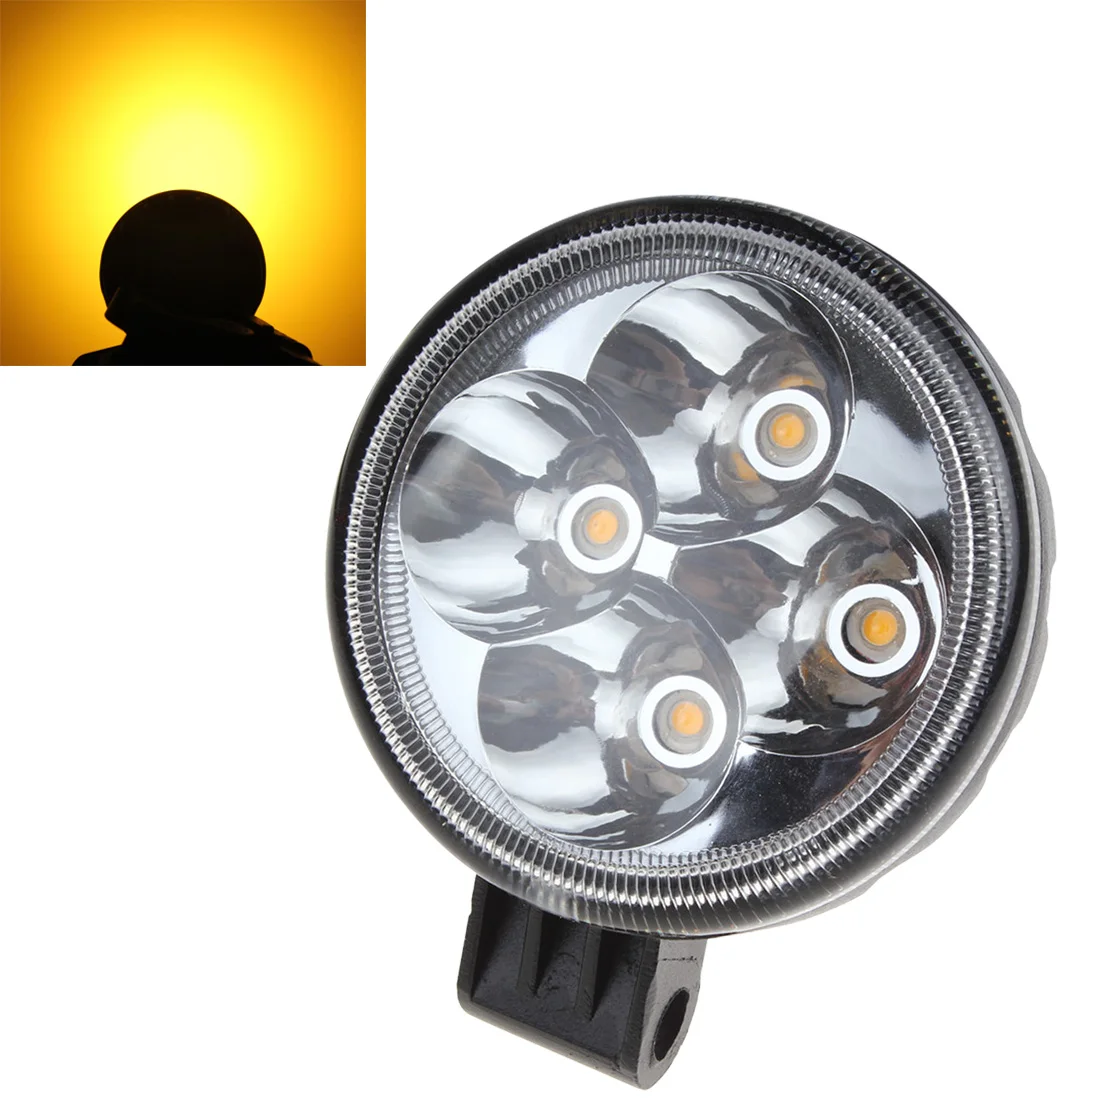 

3 X 2 Inch Round 12W 2000K 780LM Yellow LED Light Working Lamp Flood & Spot Work Light for Automobile SUV Truck Lorry Motorcycle